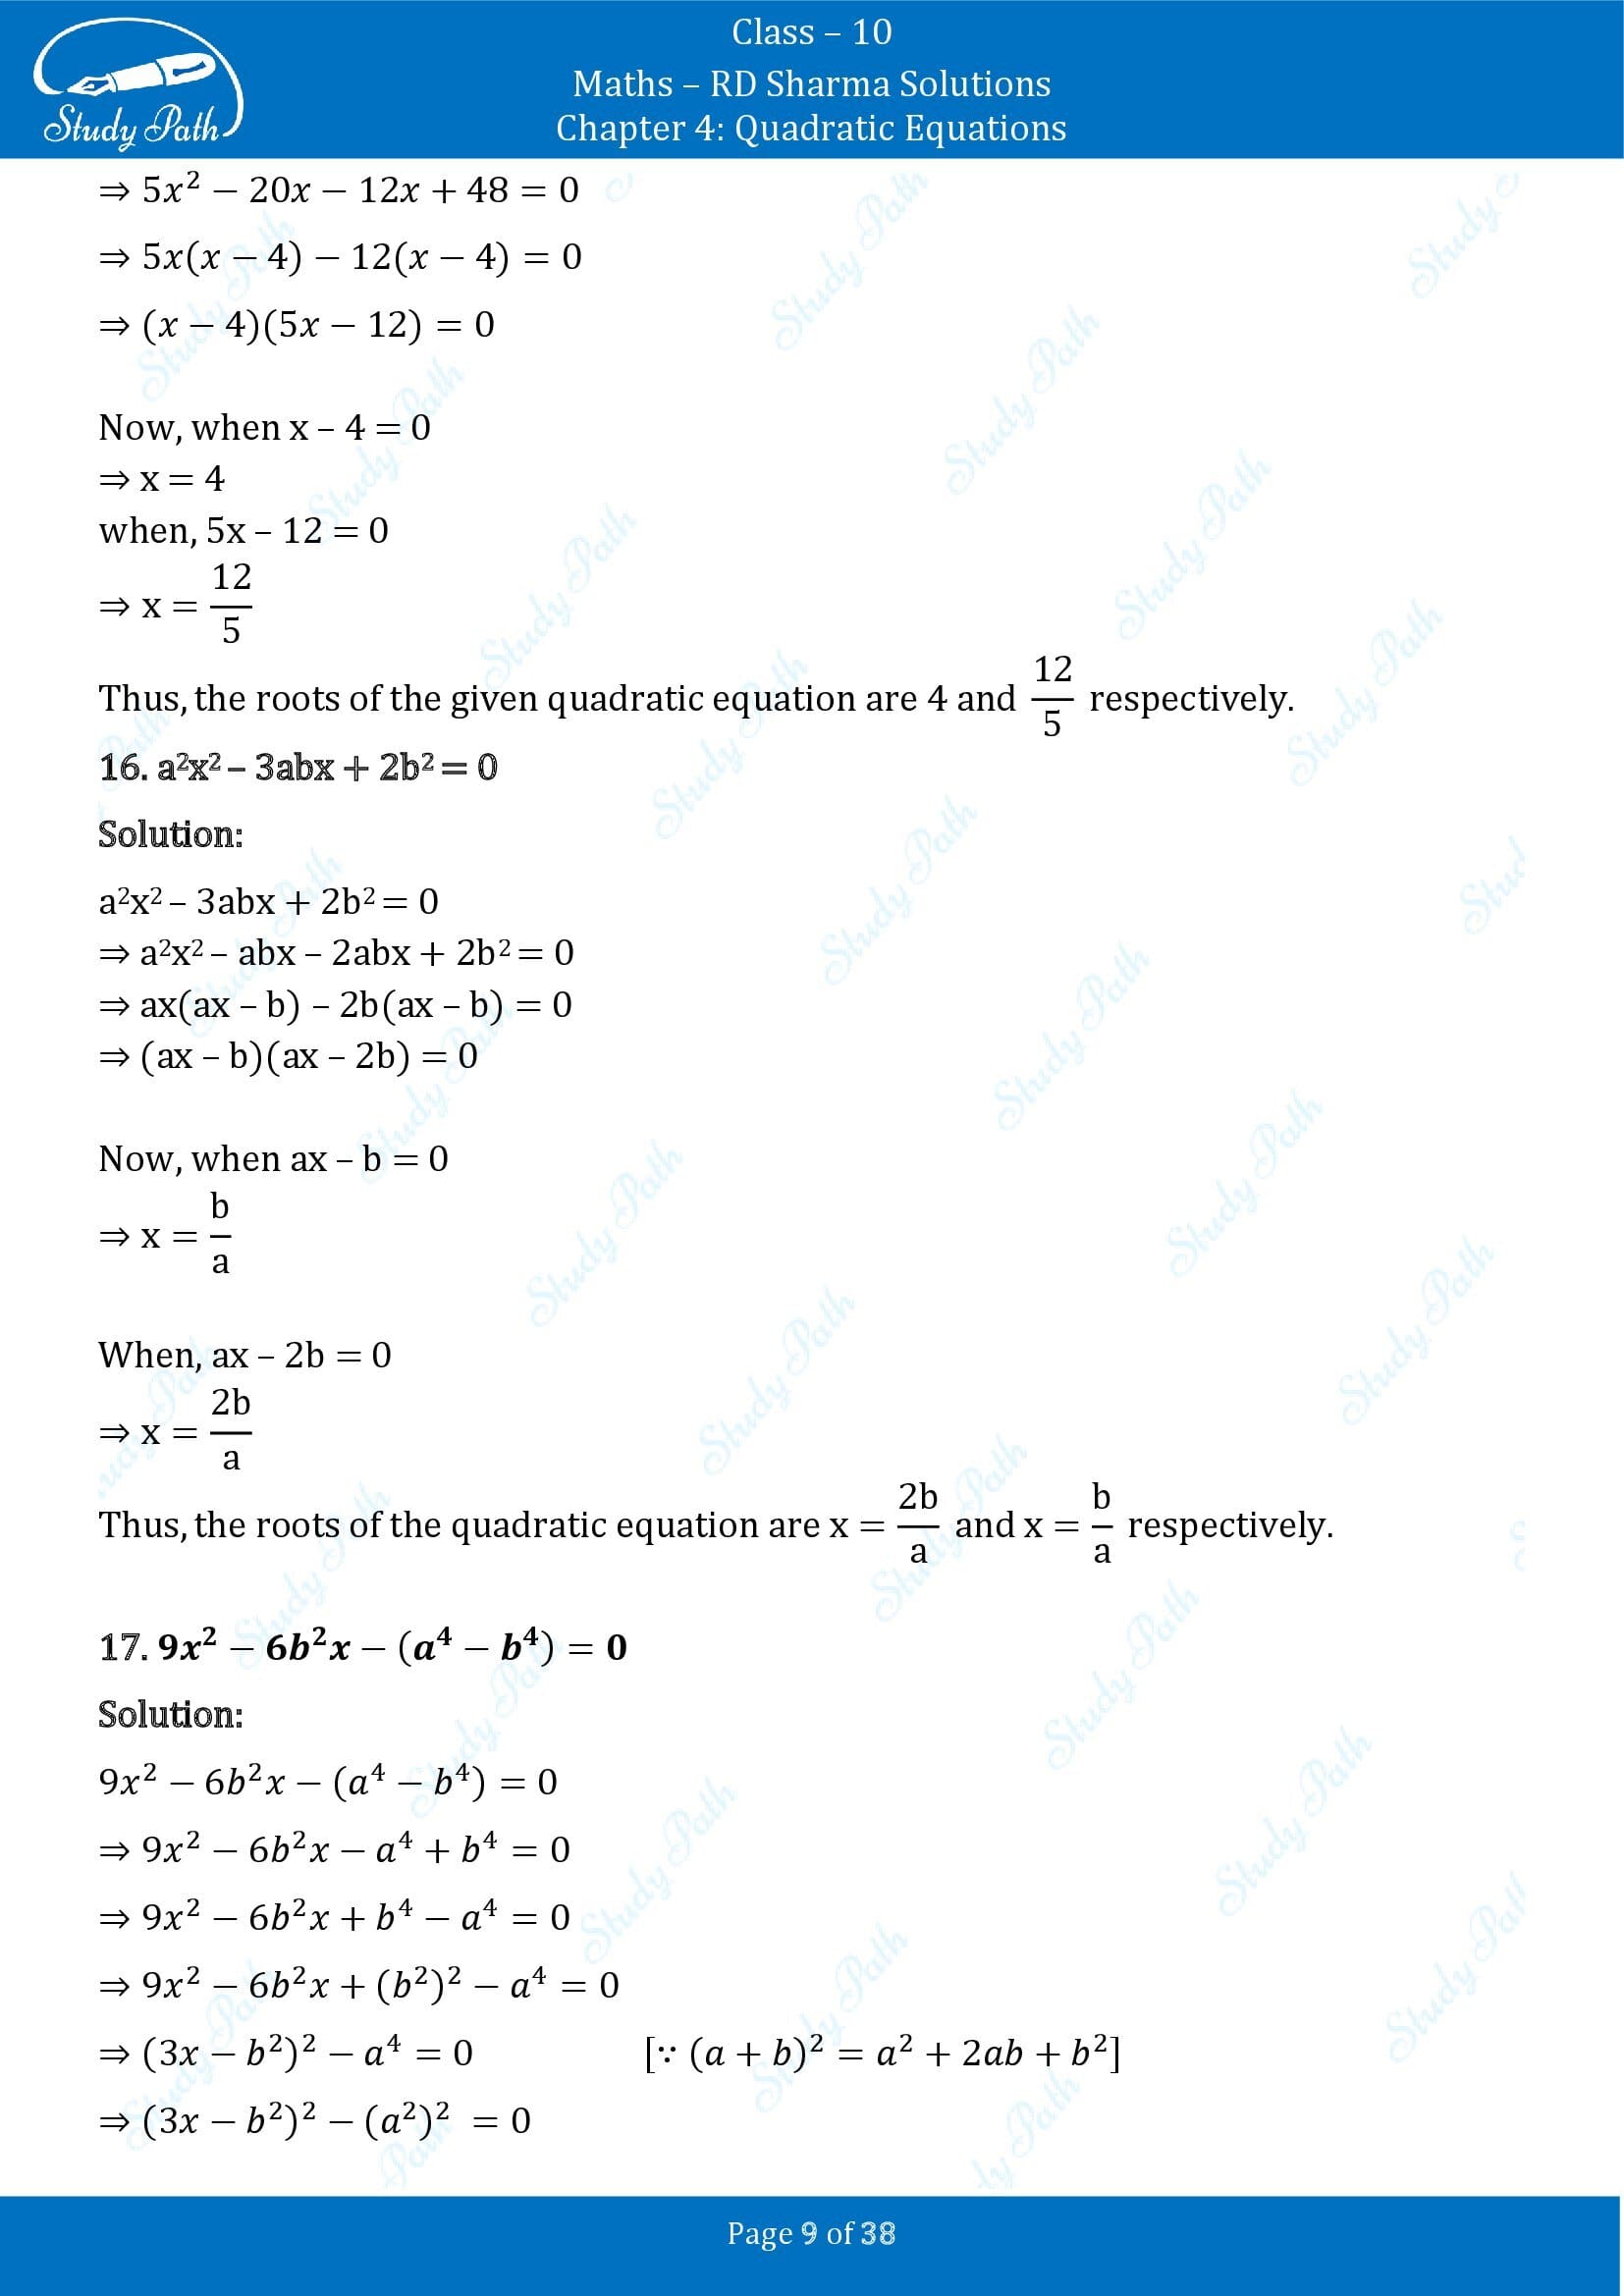 RD Sharma Solutions Class 10 Chapter 4 Quadratic Equations Exercise 4.3 00009